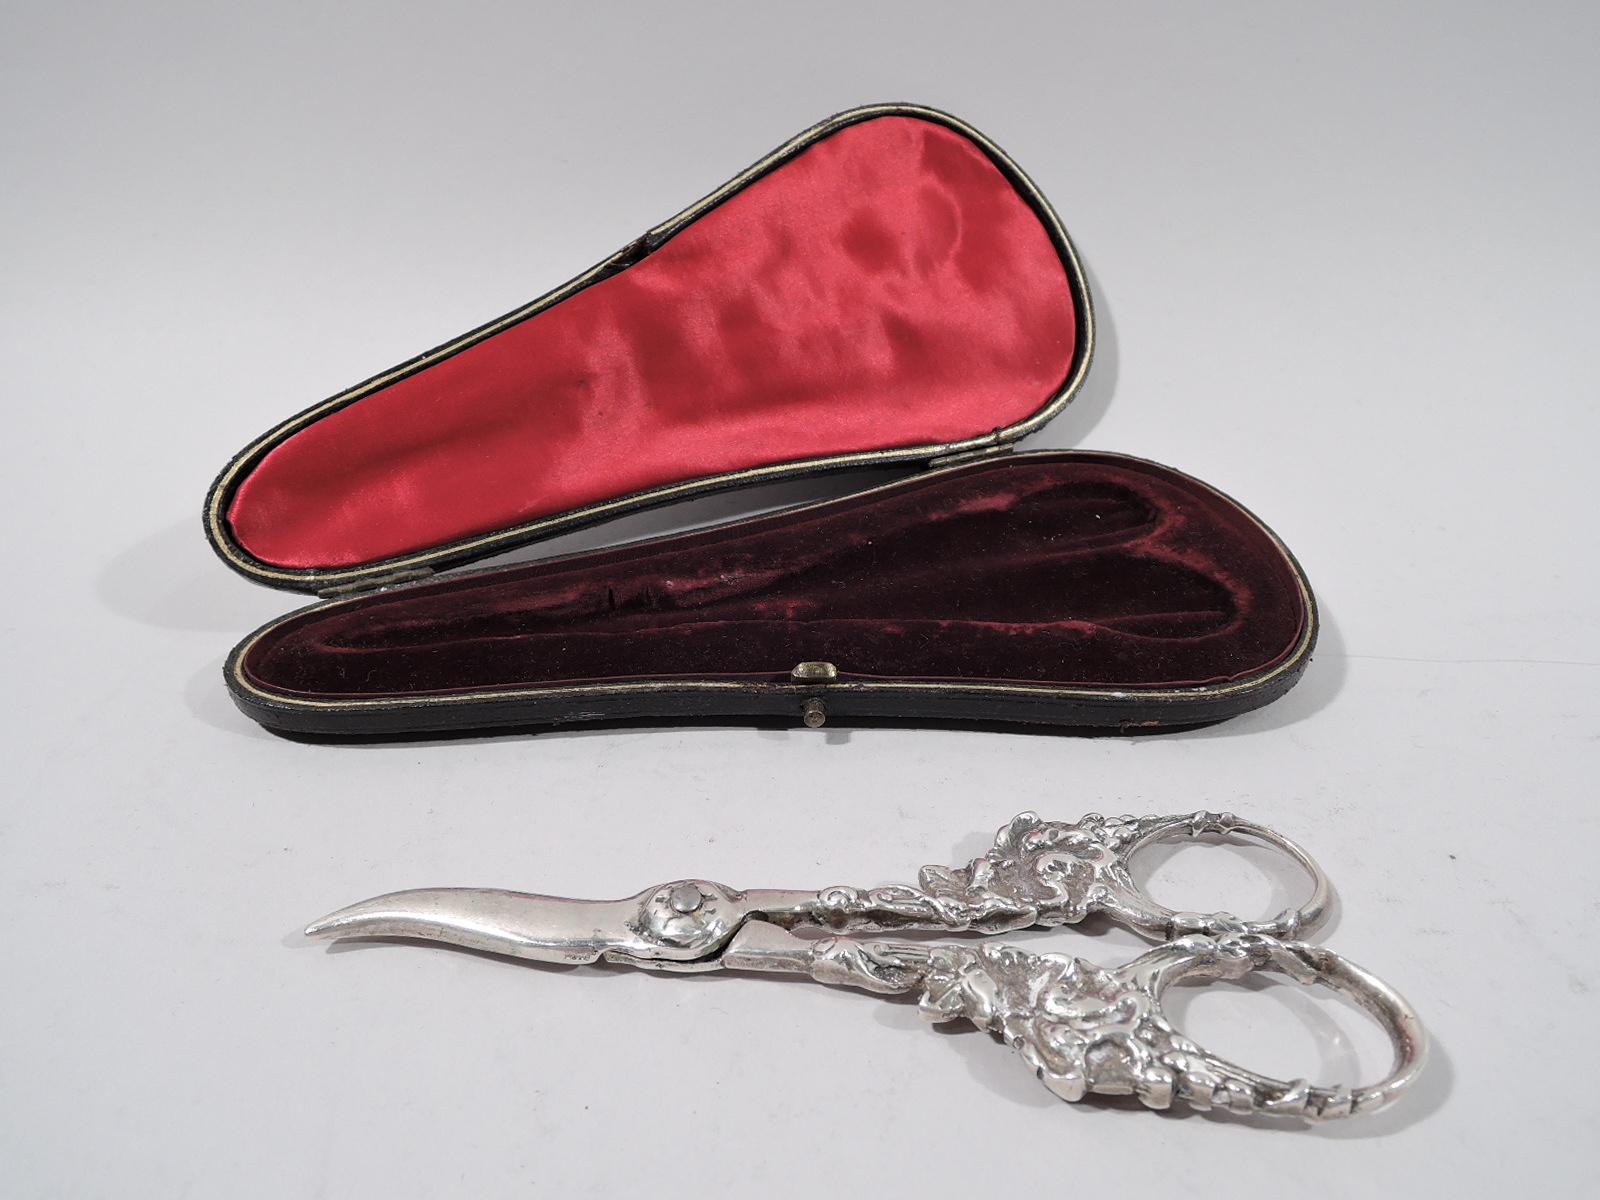 American sterling silver grape shears, circa 1920. Handles in form of fruiting grapevine, which wraps around the finger rings. In leather-bound case with silk lining and fitted velvet. Scissors marked “Sterling”. 

Dimensions: Scissors: H 6 in.